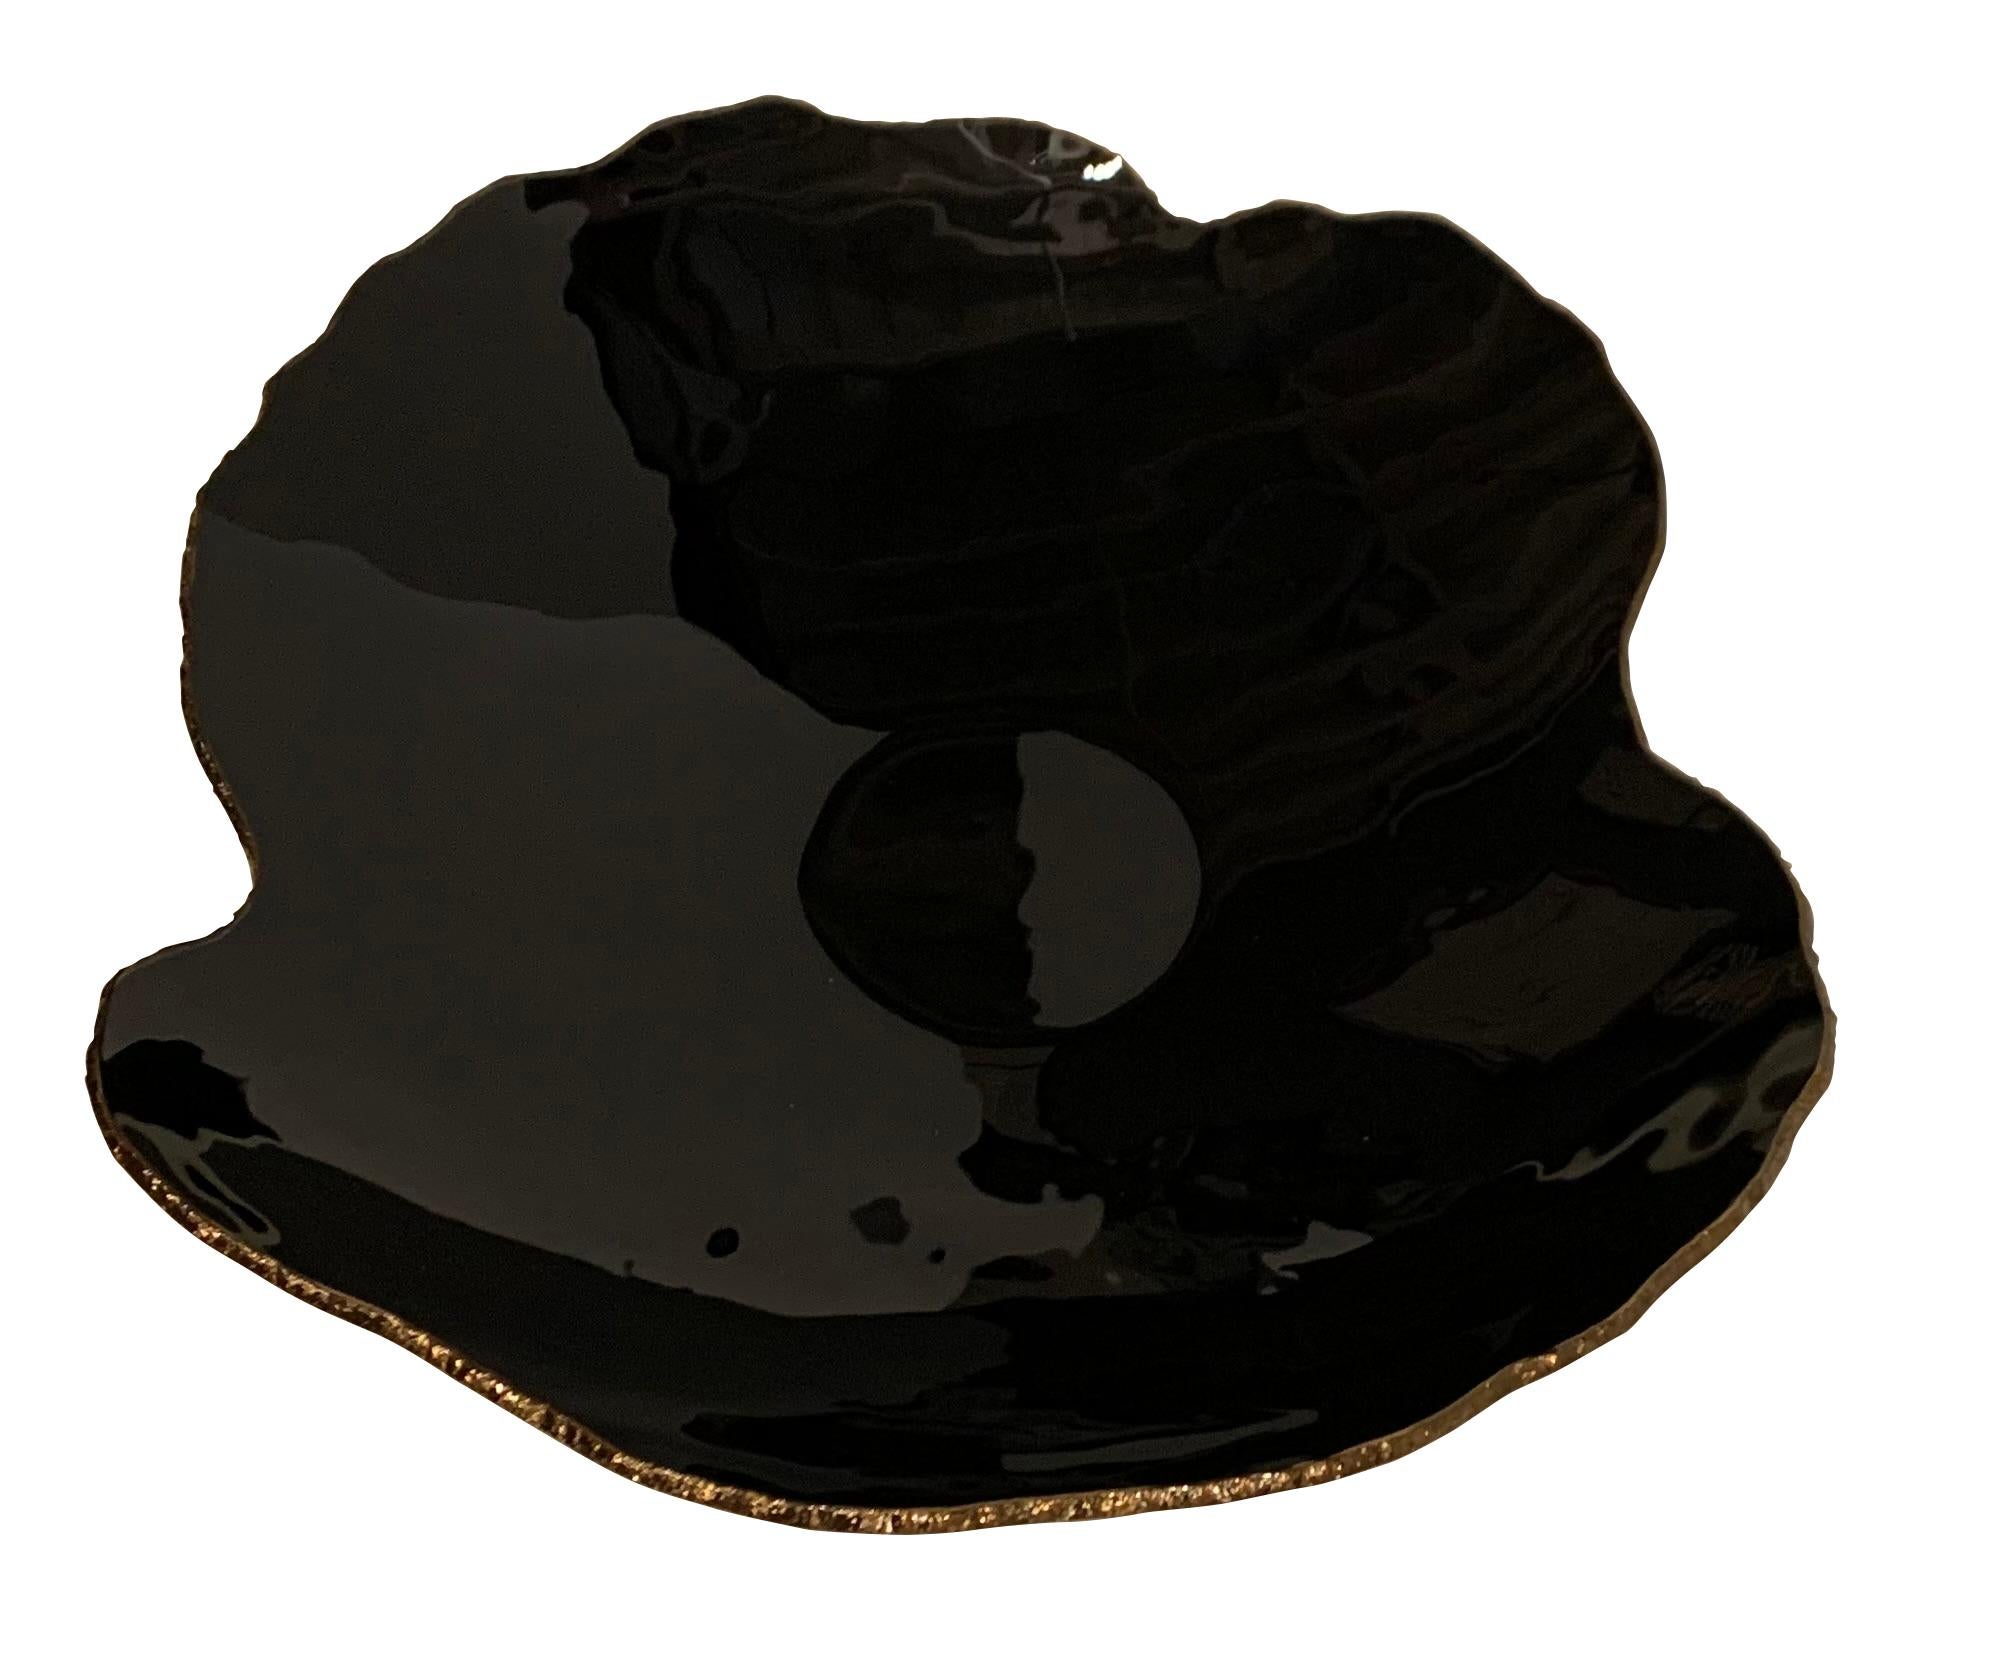 Contemporary Brazilian free form shaped high gloss black glass bowl. 
Chiseled rough edges in gold color.
One of several pieces from a large collection of Brazilian designed glass objects.